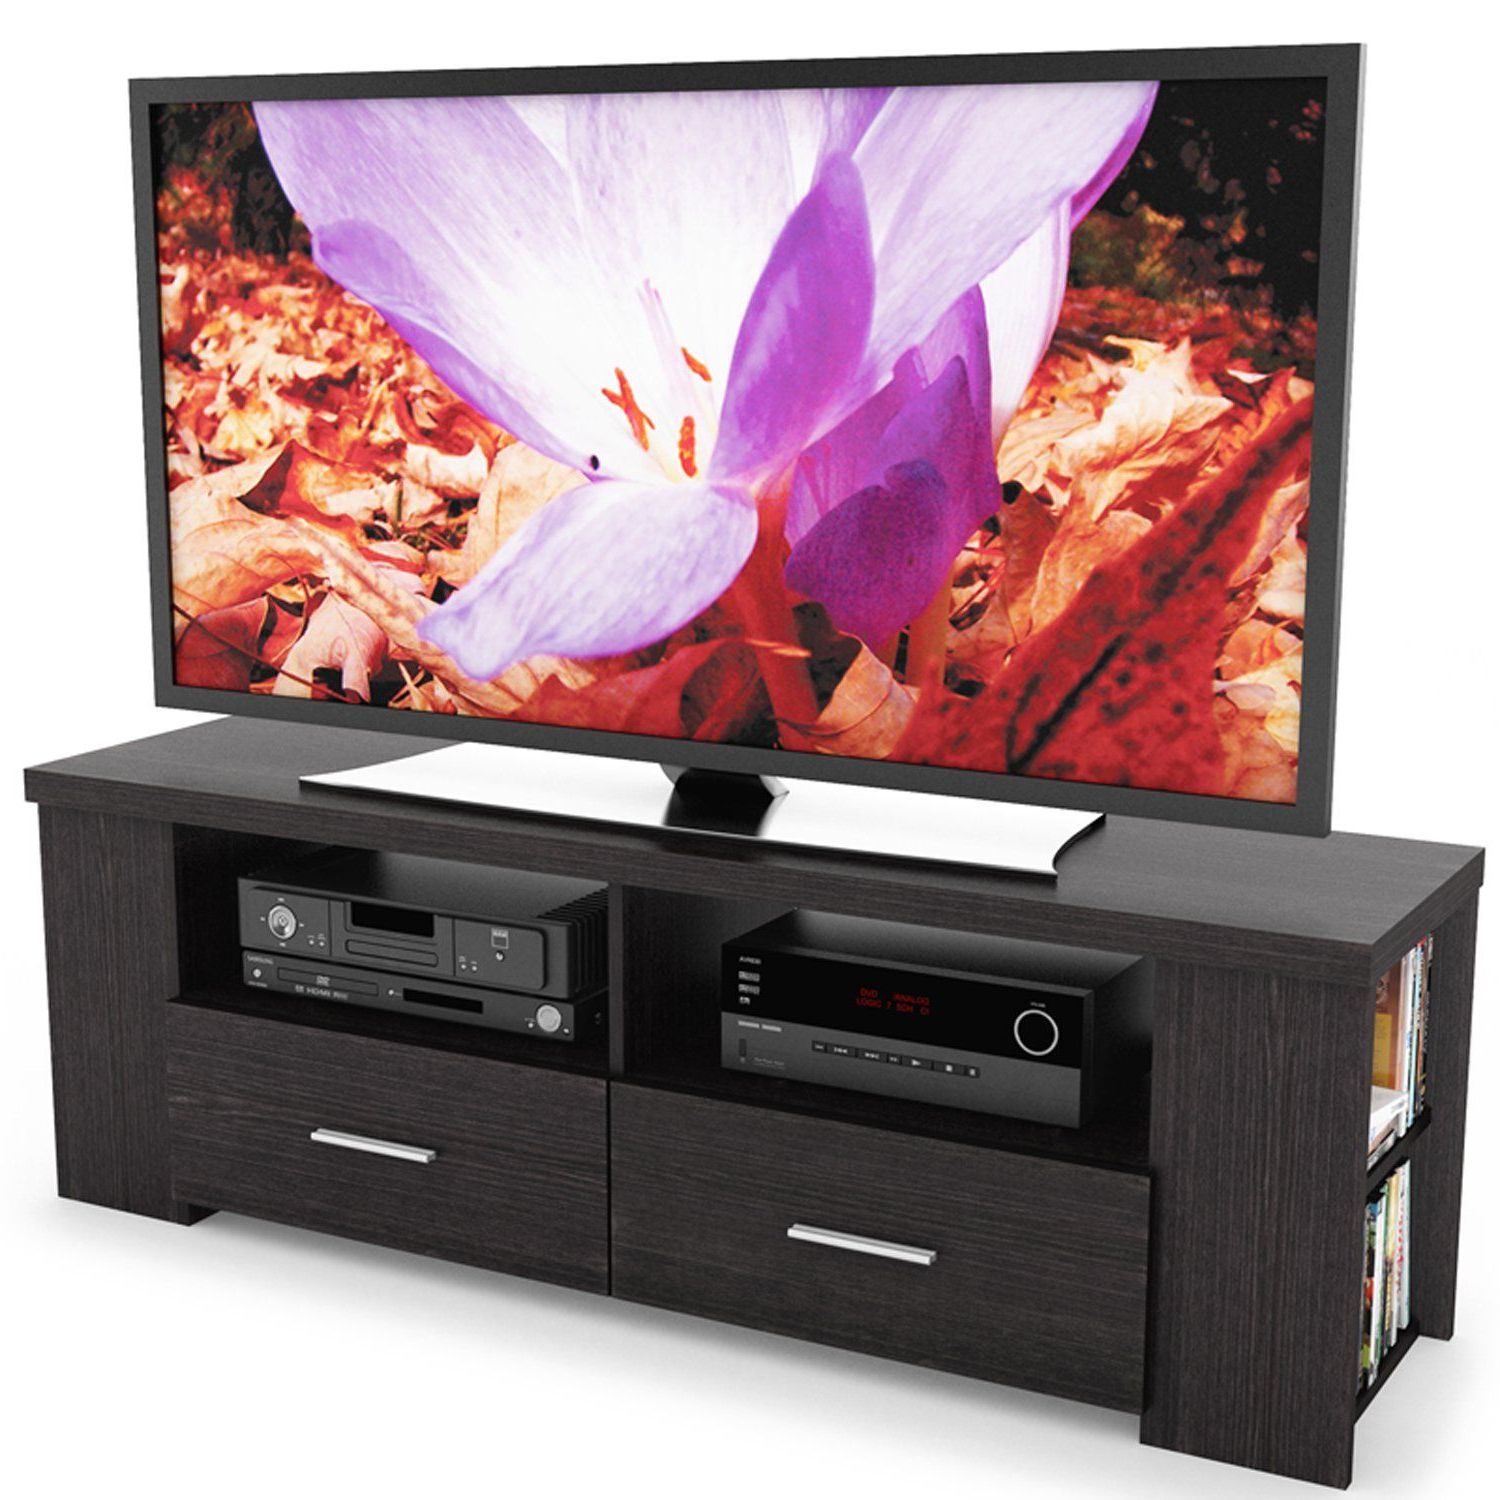 Amazon – Sonax B 101 Rbt Bromley 60 Inch Tv/component Regarding Bromley Black Wide Tv Stands (View 17 of 20)